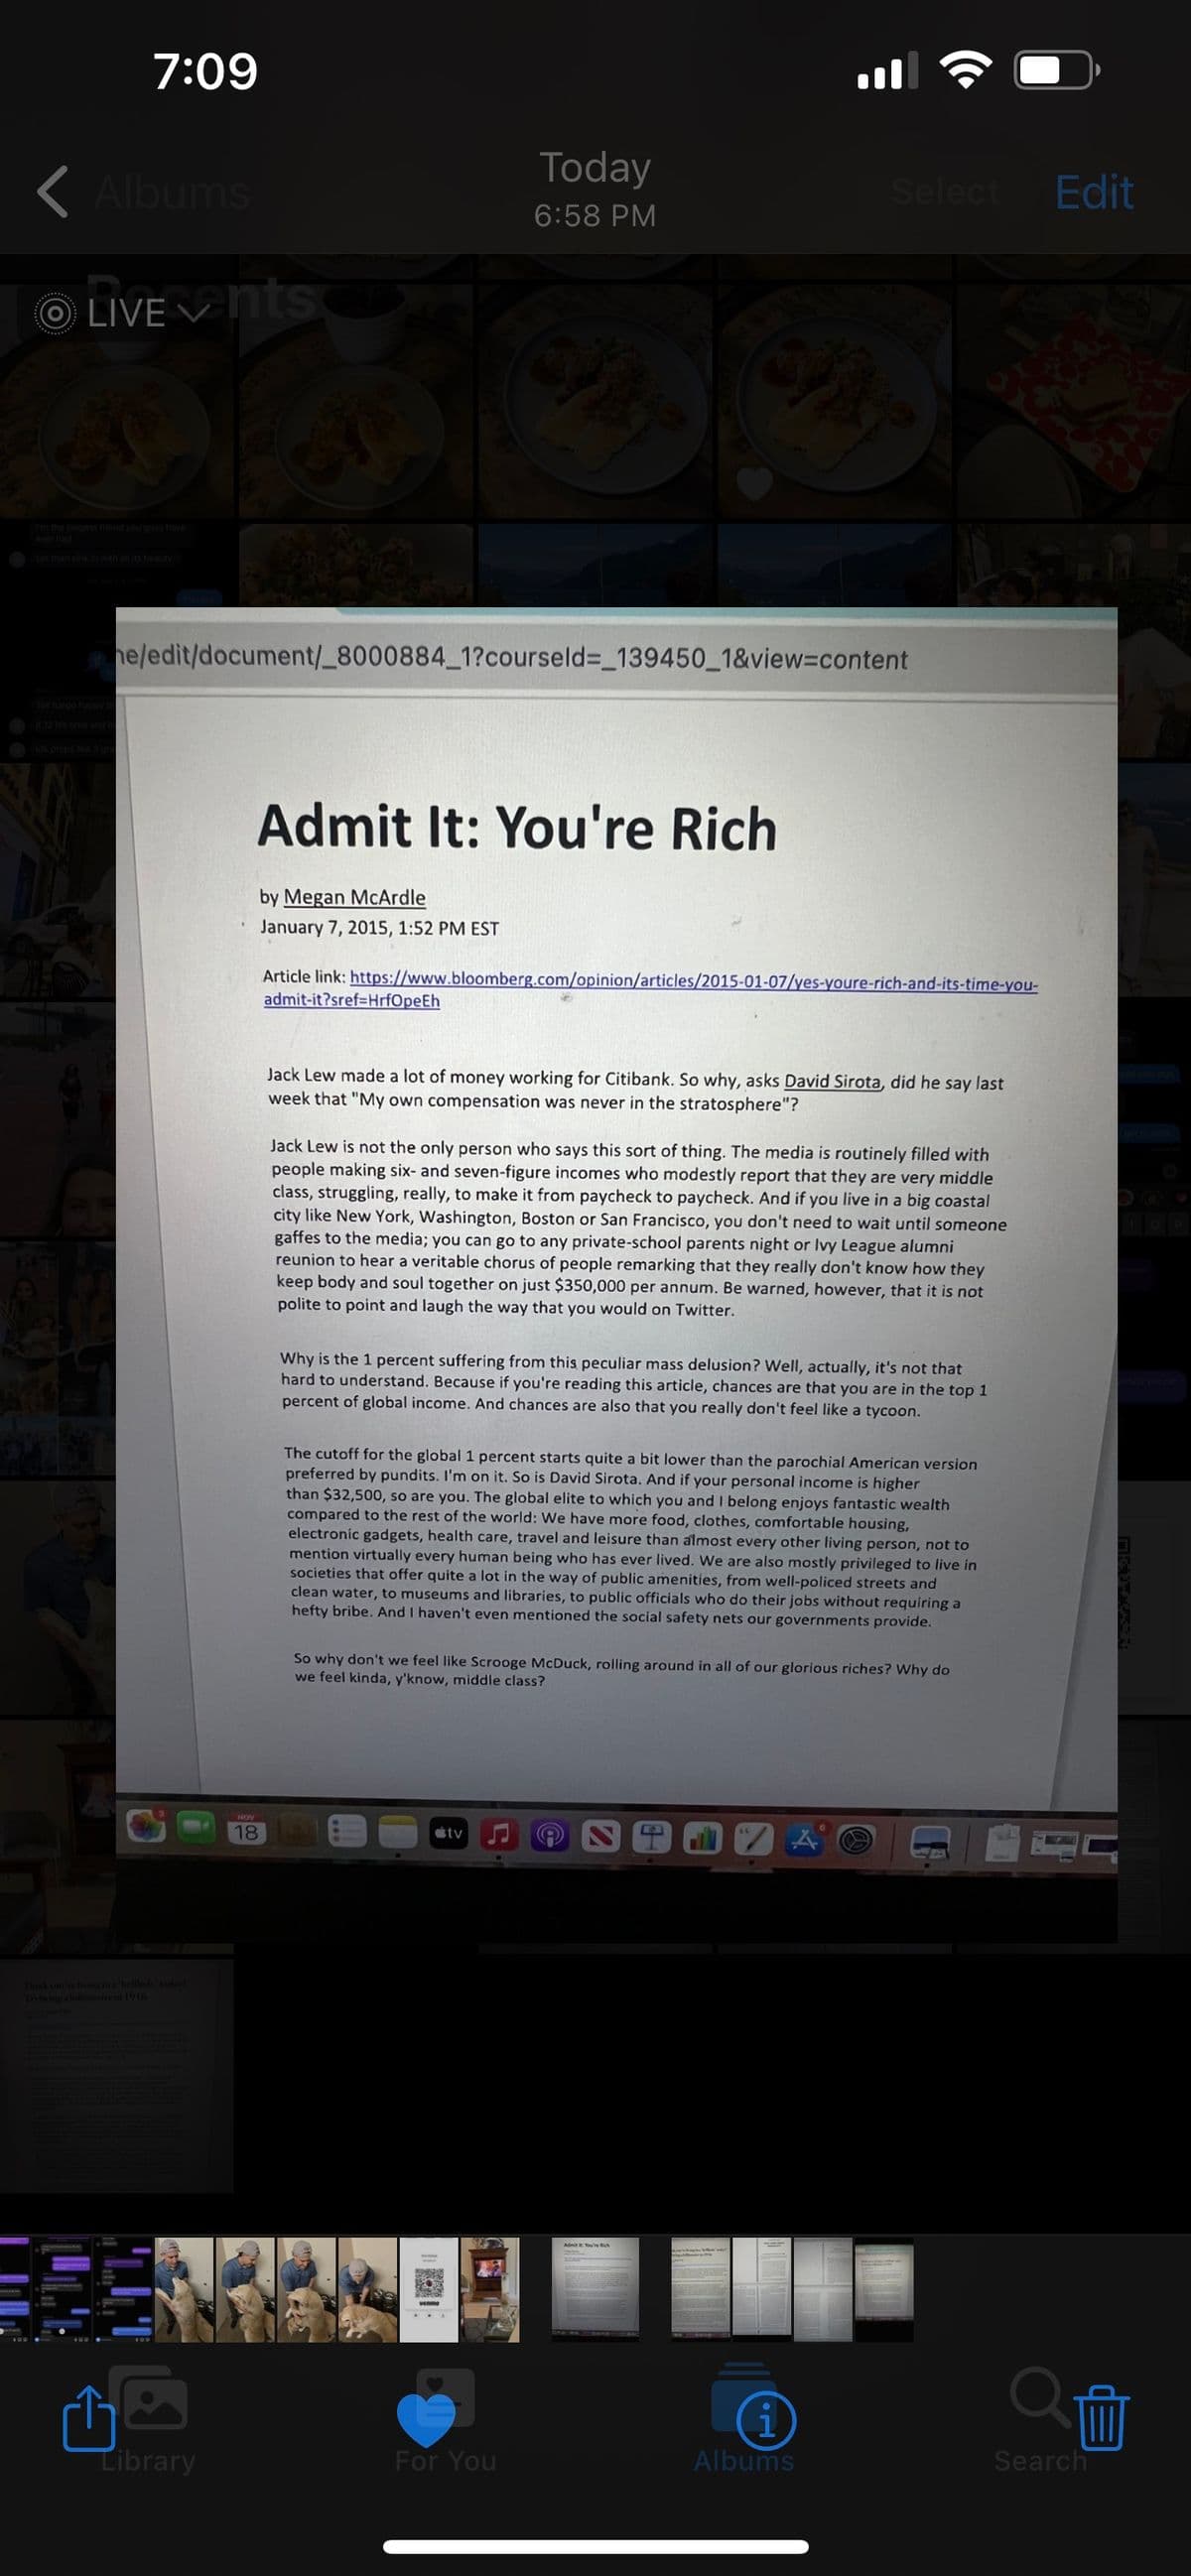 7:09
<Albums
ⒸLIVE ✓nts
Library
he/edit/document/_8000884_1?courseld=_139450_1&view=content
Admit It: You're Rich
NOV
18
by Megan McArdle
January 7, 2015, 1:52 PM EST
Today
6:58 PM
Article link: https://www.bloomberg.com/opinion/articles/2015-01-07/yes-youre-rich-and-its-time-you-
admit-it?sref=HrfOpeEh
Jack Lew made a lot of money working for Citibank. So why, asks David Sirota, did he say last
week that "My own compensation was never in the stratosphere"?
Select Edit
Jack Lew is not the only person who says this sort of thing. The media is routinely filled with
people making six- and seven-figure incomes who modestly report that they are very middle
class, struggling, really, to make it from paycheck to paycheck. And if you live in a big coastal
city like New York, Washington, Boston or San Francisco, you don't need to wait until someone
gaffes to the media; you can go to any private-school parents night or Ivy League alumni
reunion to hear a veritable chorus of people remarking that they really don't know how they
keep body and soul together on just $350,000 per annum. Be warned, however, that it is not
polite to point and laugh the way that you would on Twitter.
Why is the 1 percent suffering from this peculiar mass delusion? Well, actually, it's not that
hard to understand. Because if you're reading this article, chances are that you are in the top 1
percent of global income. And chances are also that you really don't feel like a tycoon.
The cutoff for the global 1 percent starts quite a bit lower than the parochial American version
preferred by pundits. I'm on it. So is David Sirota. And if your personal income is higher
than $32,500, so are you. The global elite to which you and I belong enjoys fantastic wealth
compared to the rest of the world: We have more food, clothes, comfortable housing,
electronic gadgets, health care, travel and leisure than almost every other living person, not to
mention virtually every human being who has ever lived. We are also mostly privileged to live in
societies that offer quite a lot in the way of public amenities, from well-policed streets and
clean water, to museums and libraries, to public officials who do their jobs without requiring a
hefty bribe. And I haven't even mentioned the social safety nets our governments provide.
tv
So why don't we feel like Scrooge McDuck, rolling around in all of our glorious riches? Why do
we feel kinda, y'know, middle class?
For You
A
i
Albums
Search